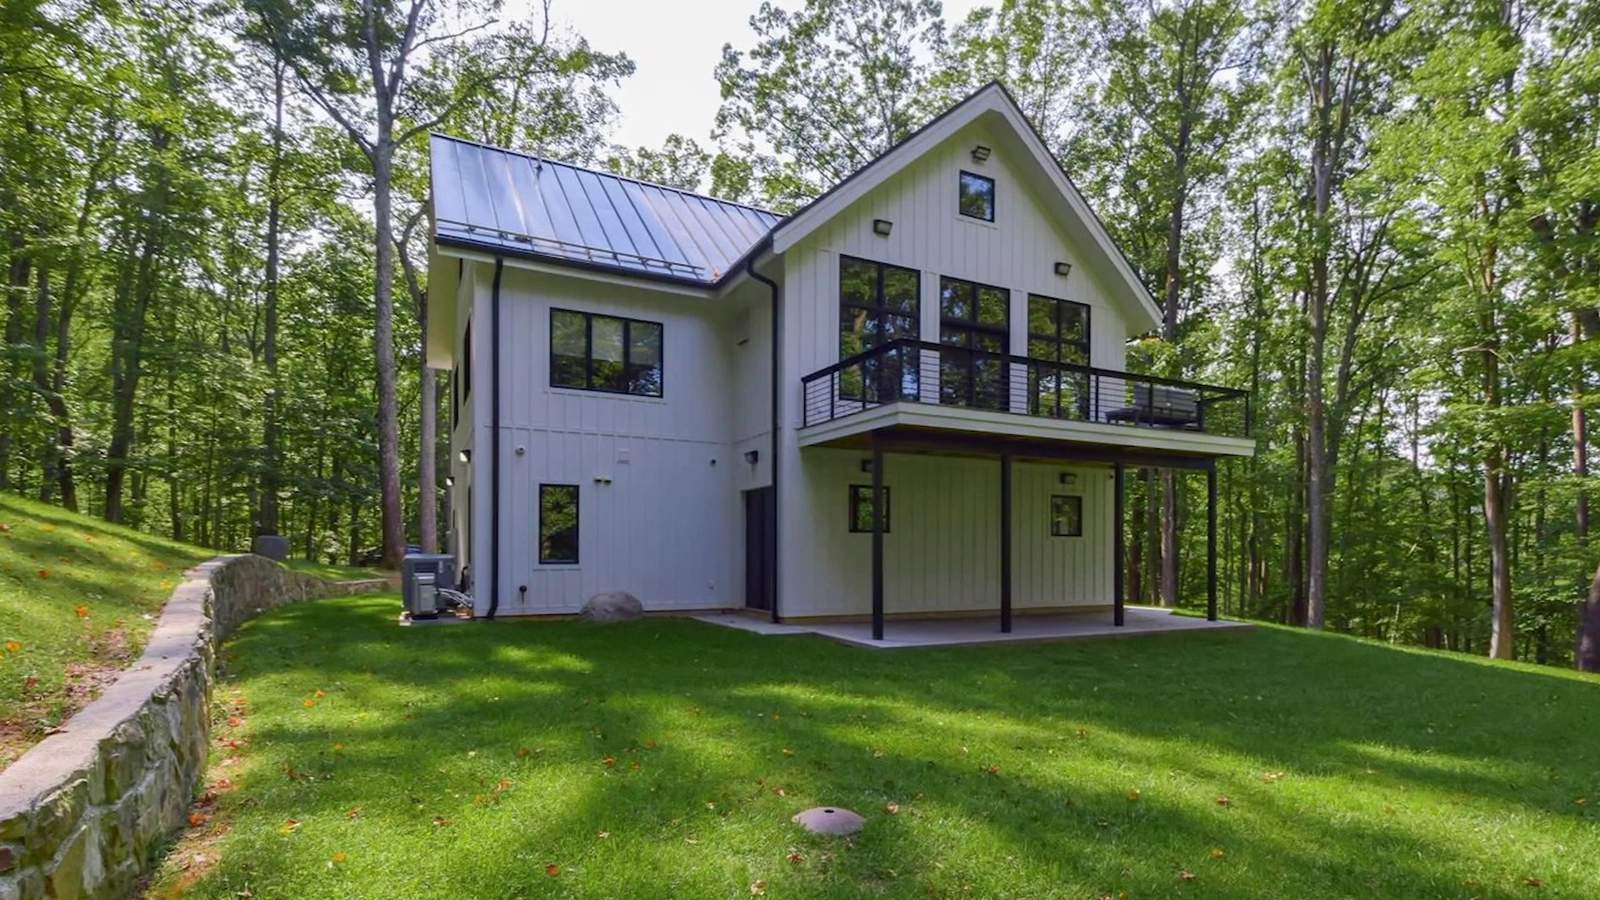 This home on land galore in Roanoke is pure luxury